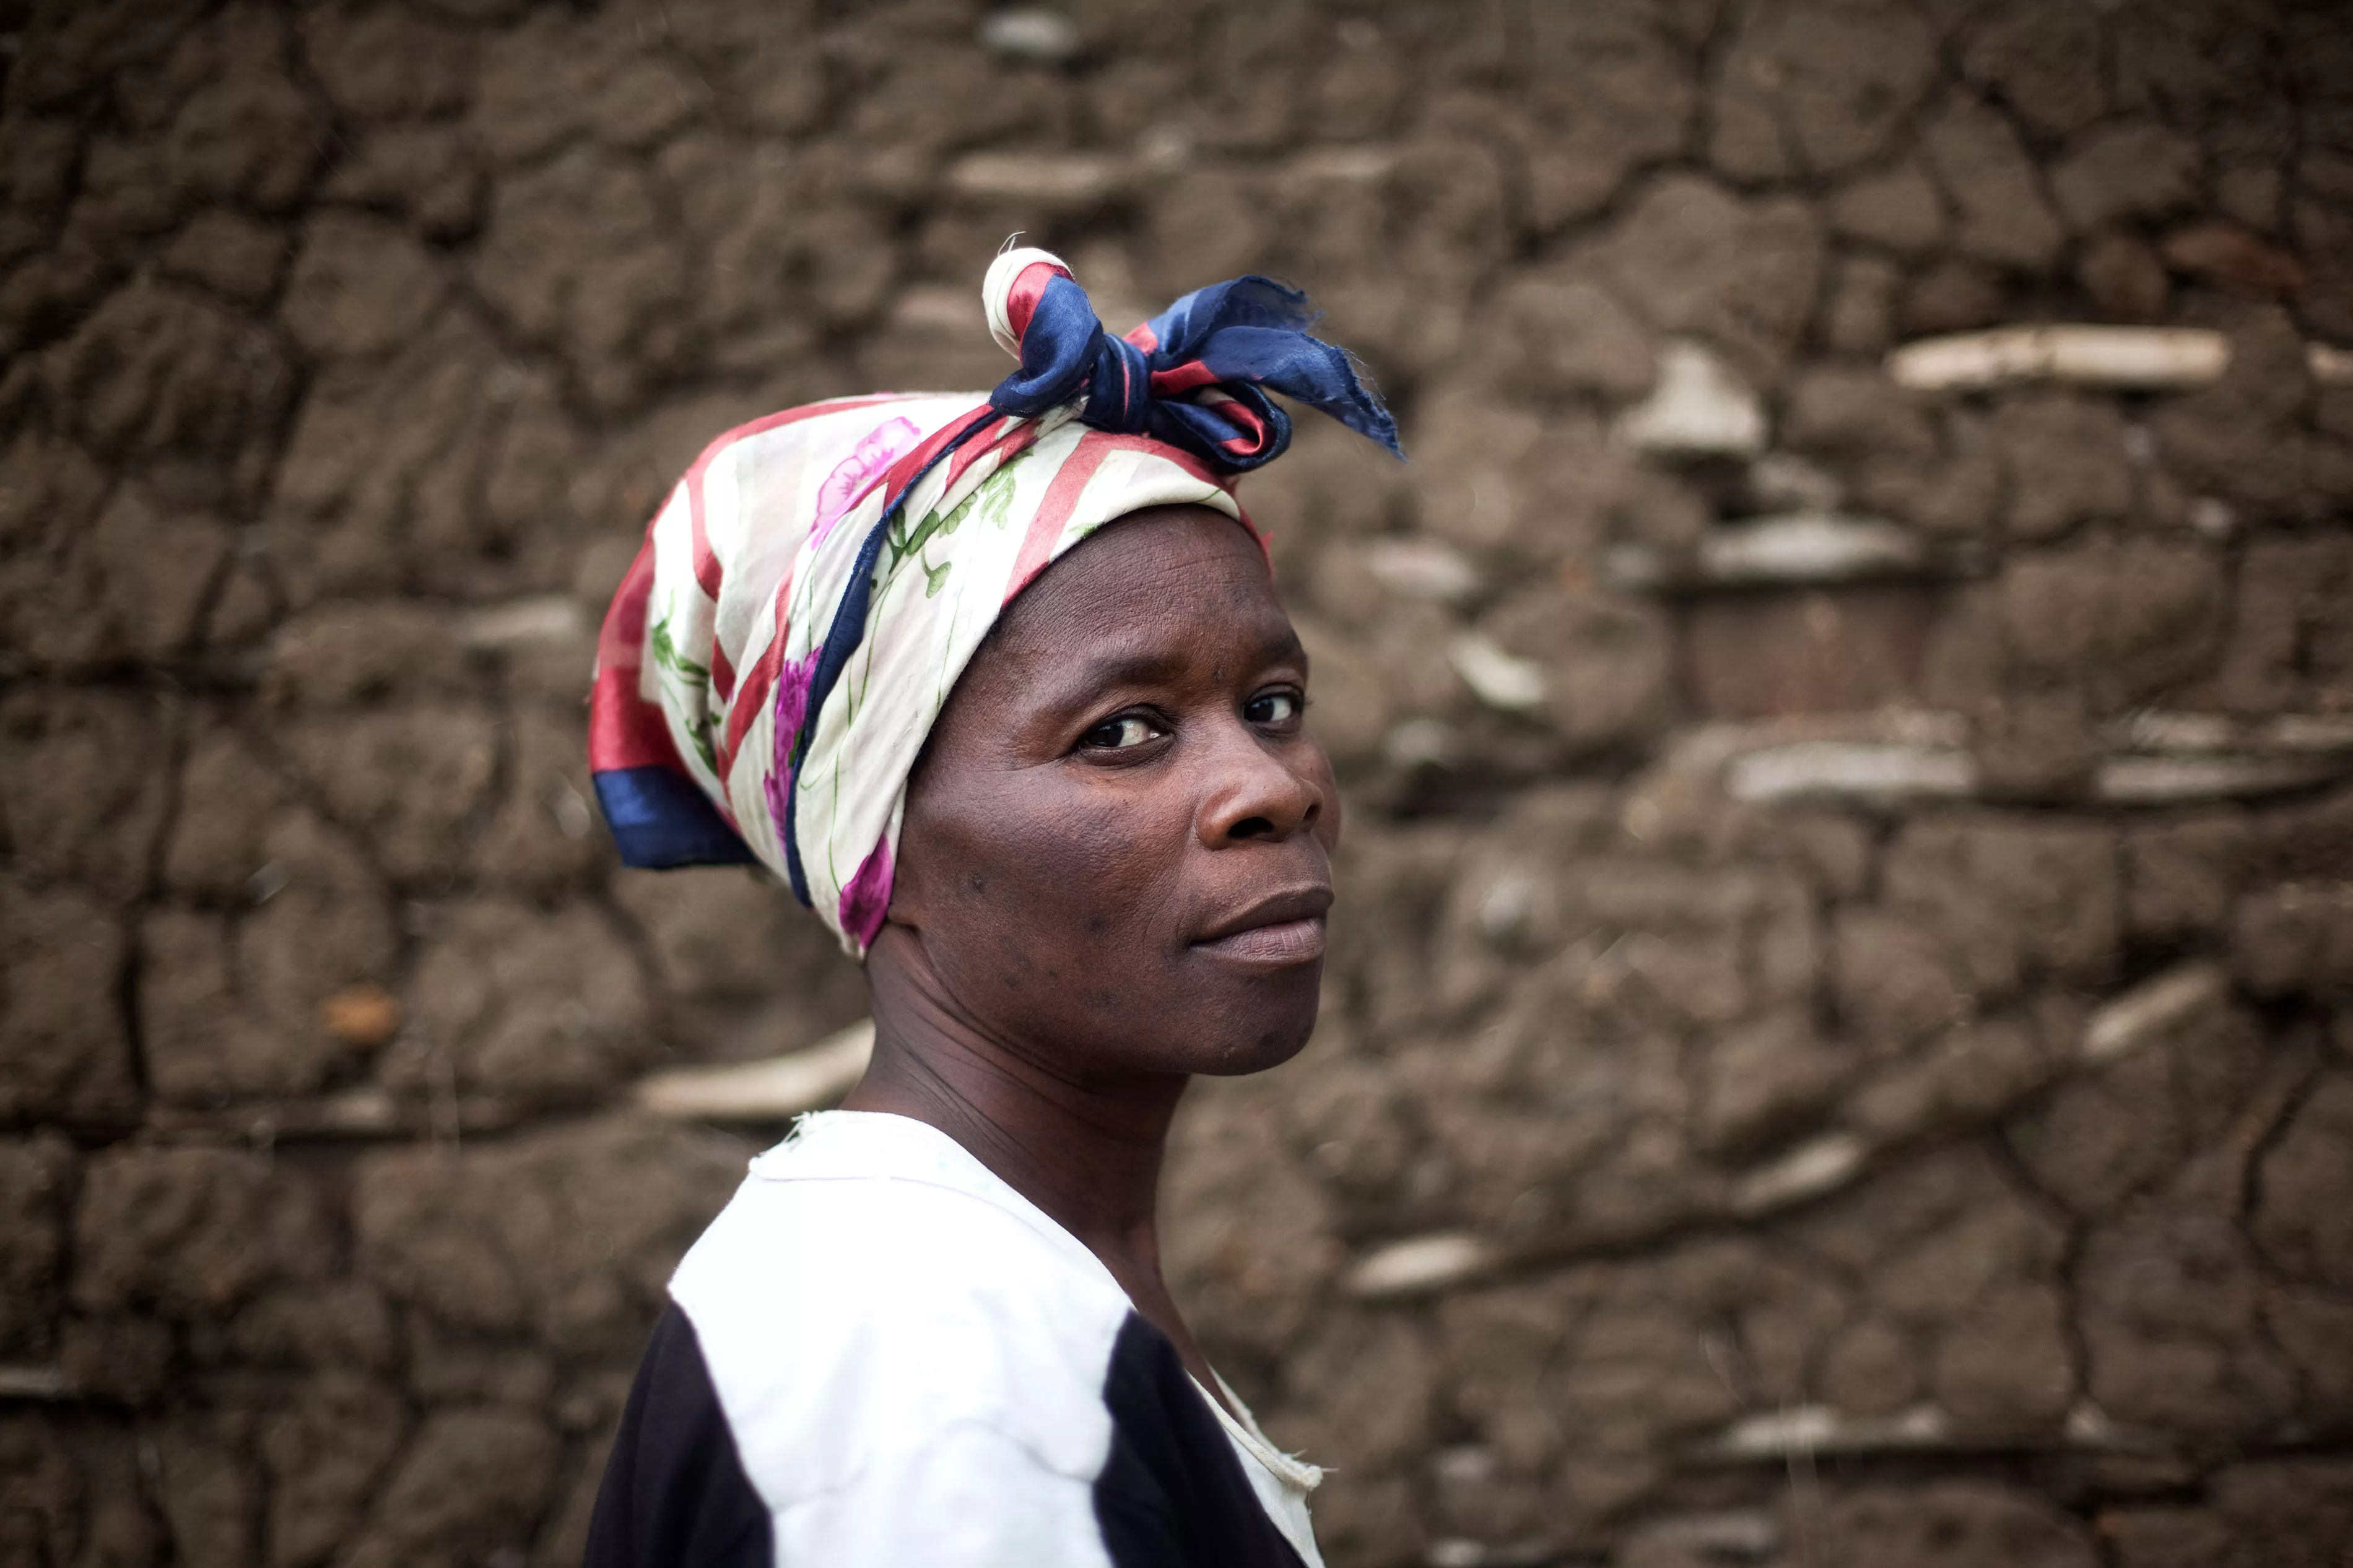 A person living with HIV on ART from Mnyatsini village in the Shiselweni region, south of Swaziland.